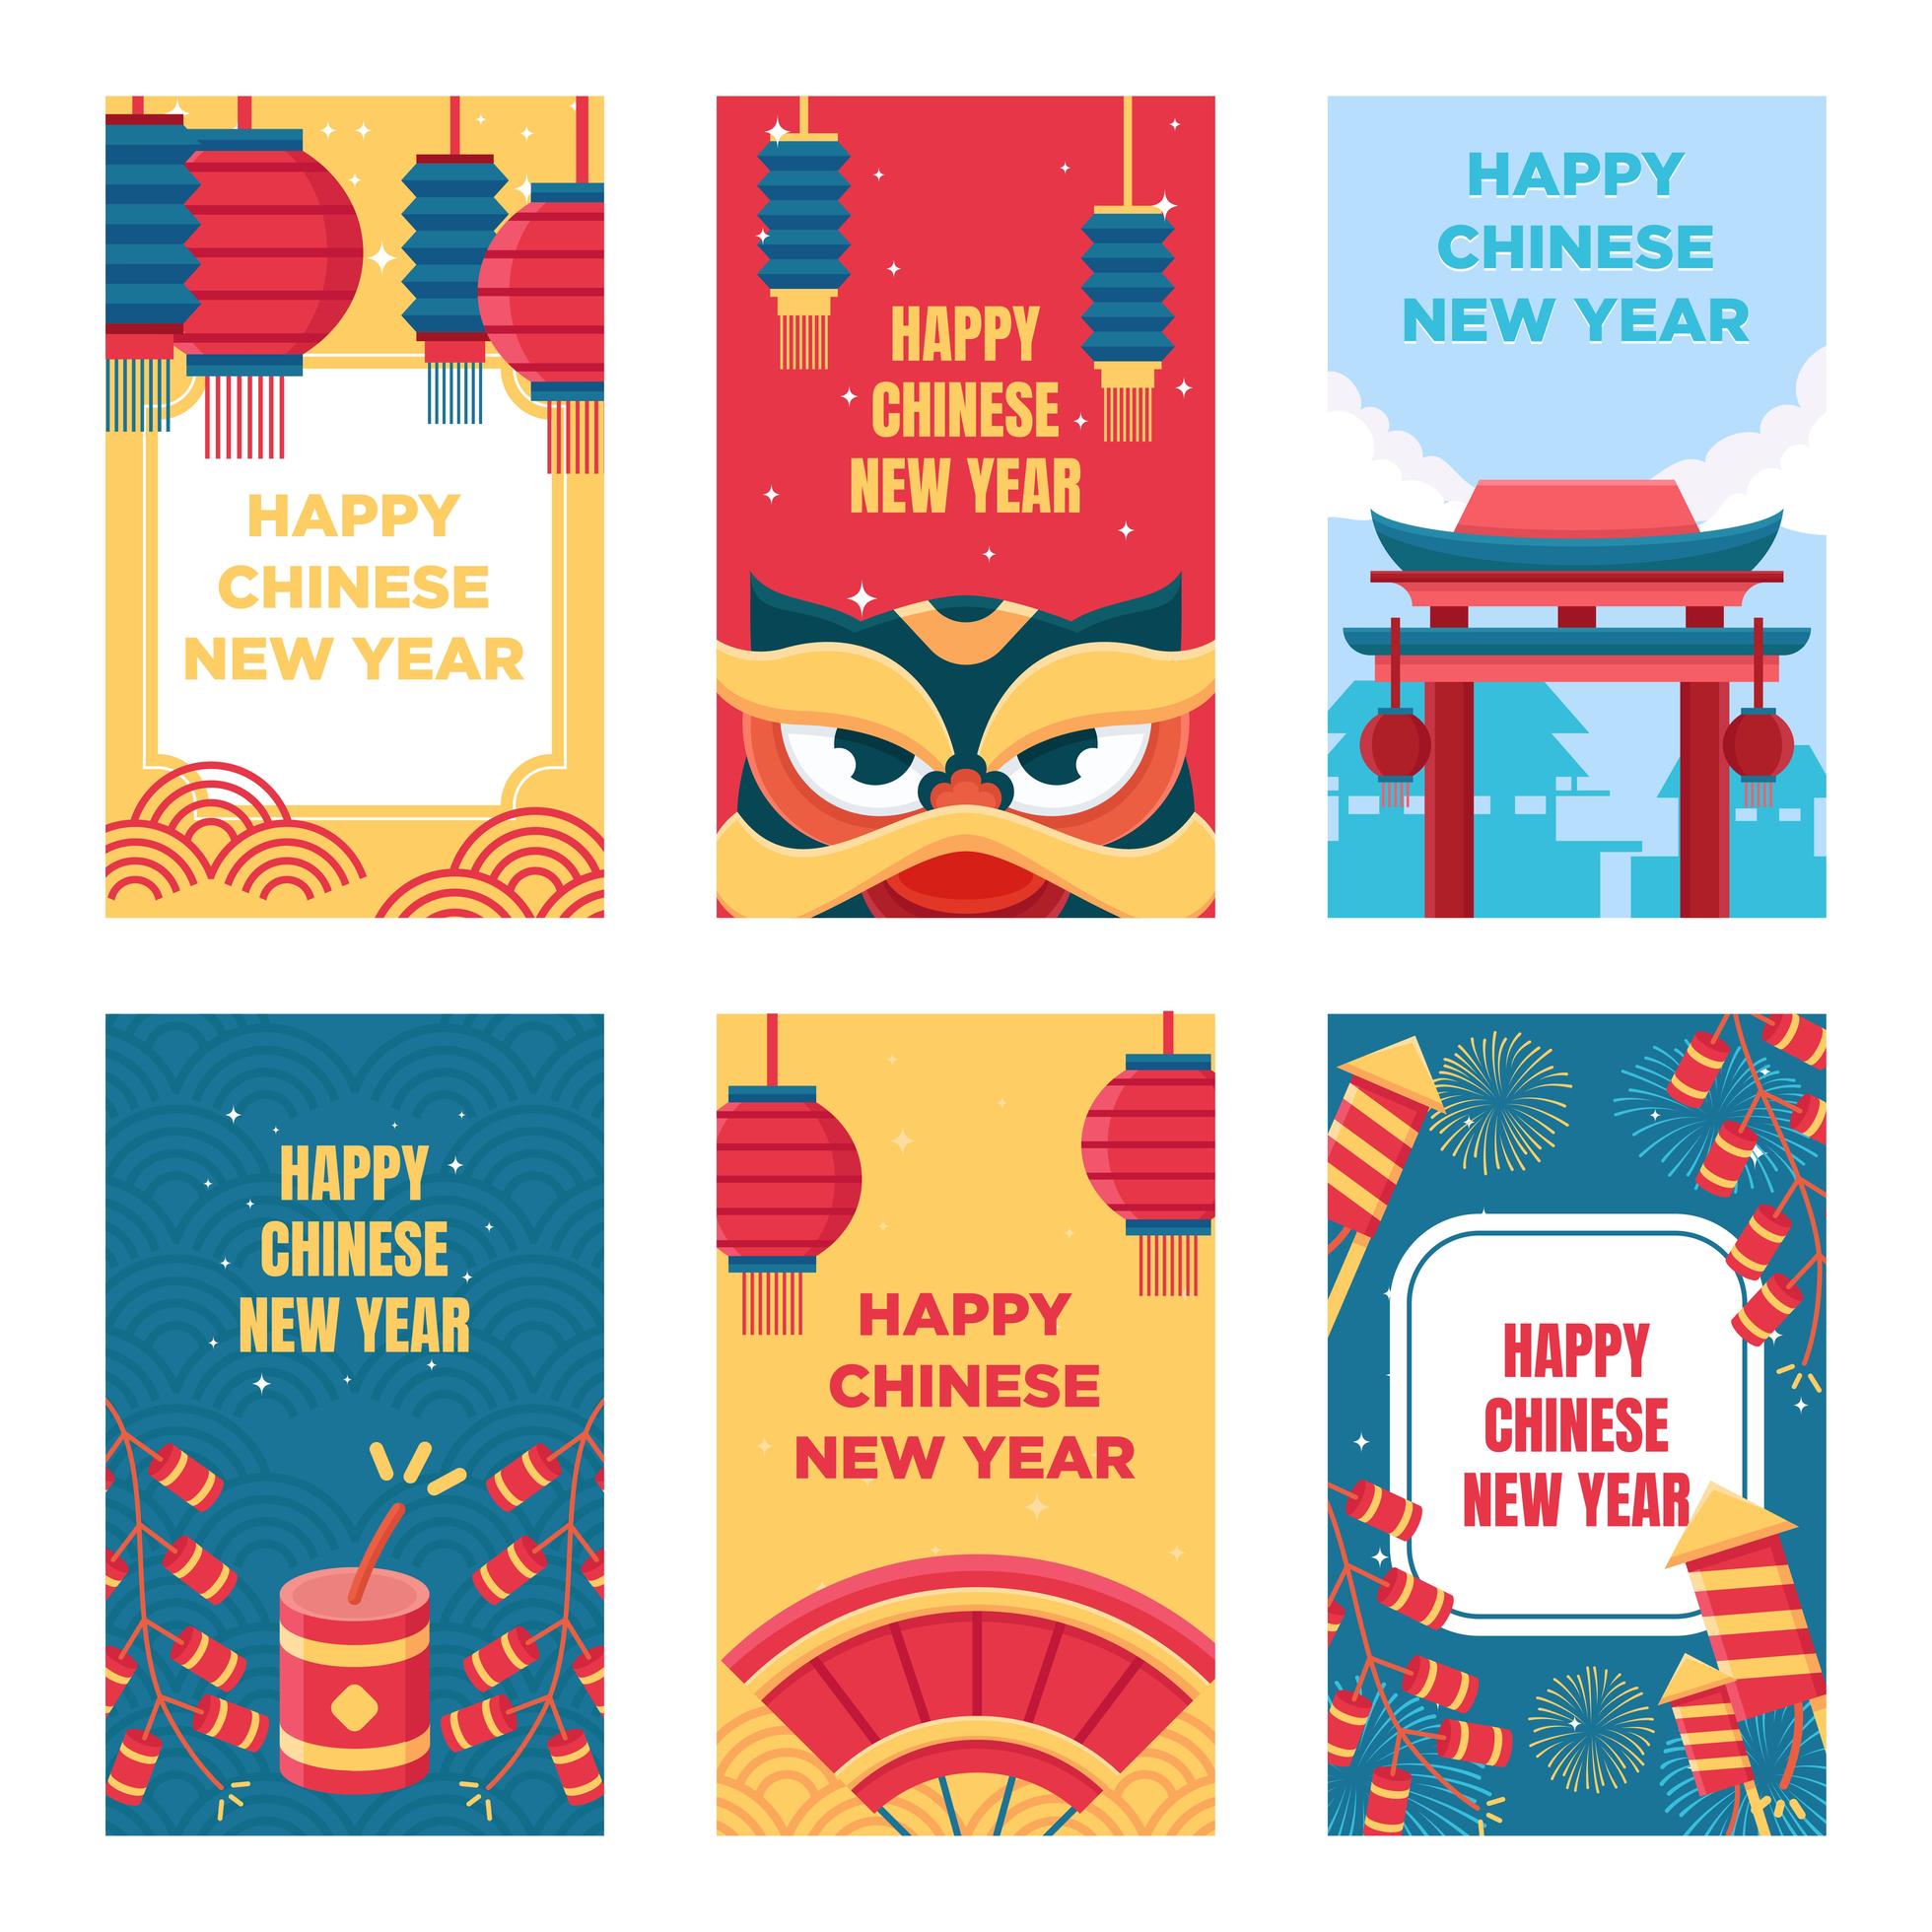 chinese-new-year-cards-1953323-vector-art-at-vecteezy